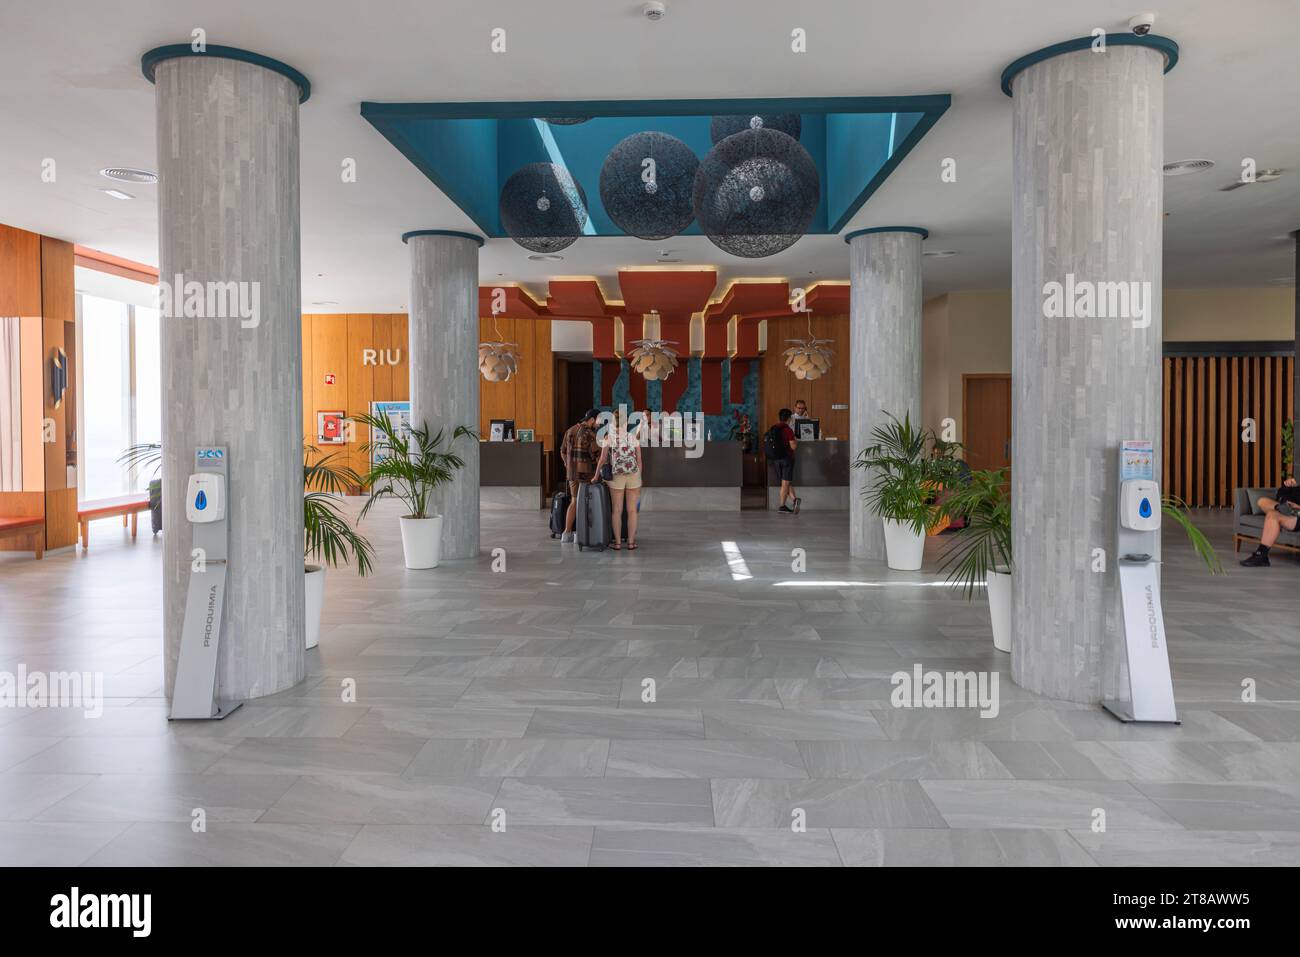 View of hotel lobby with reception area where tourists check in for rooms accommodation. Gran Canaria, Spain. Stock Photo